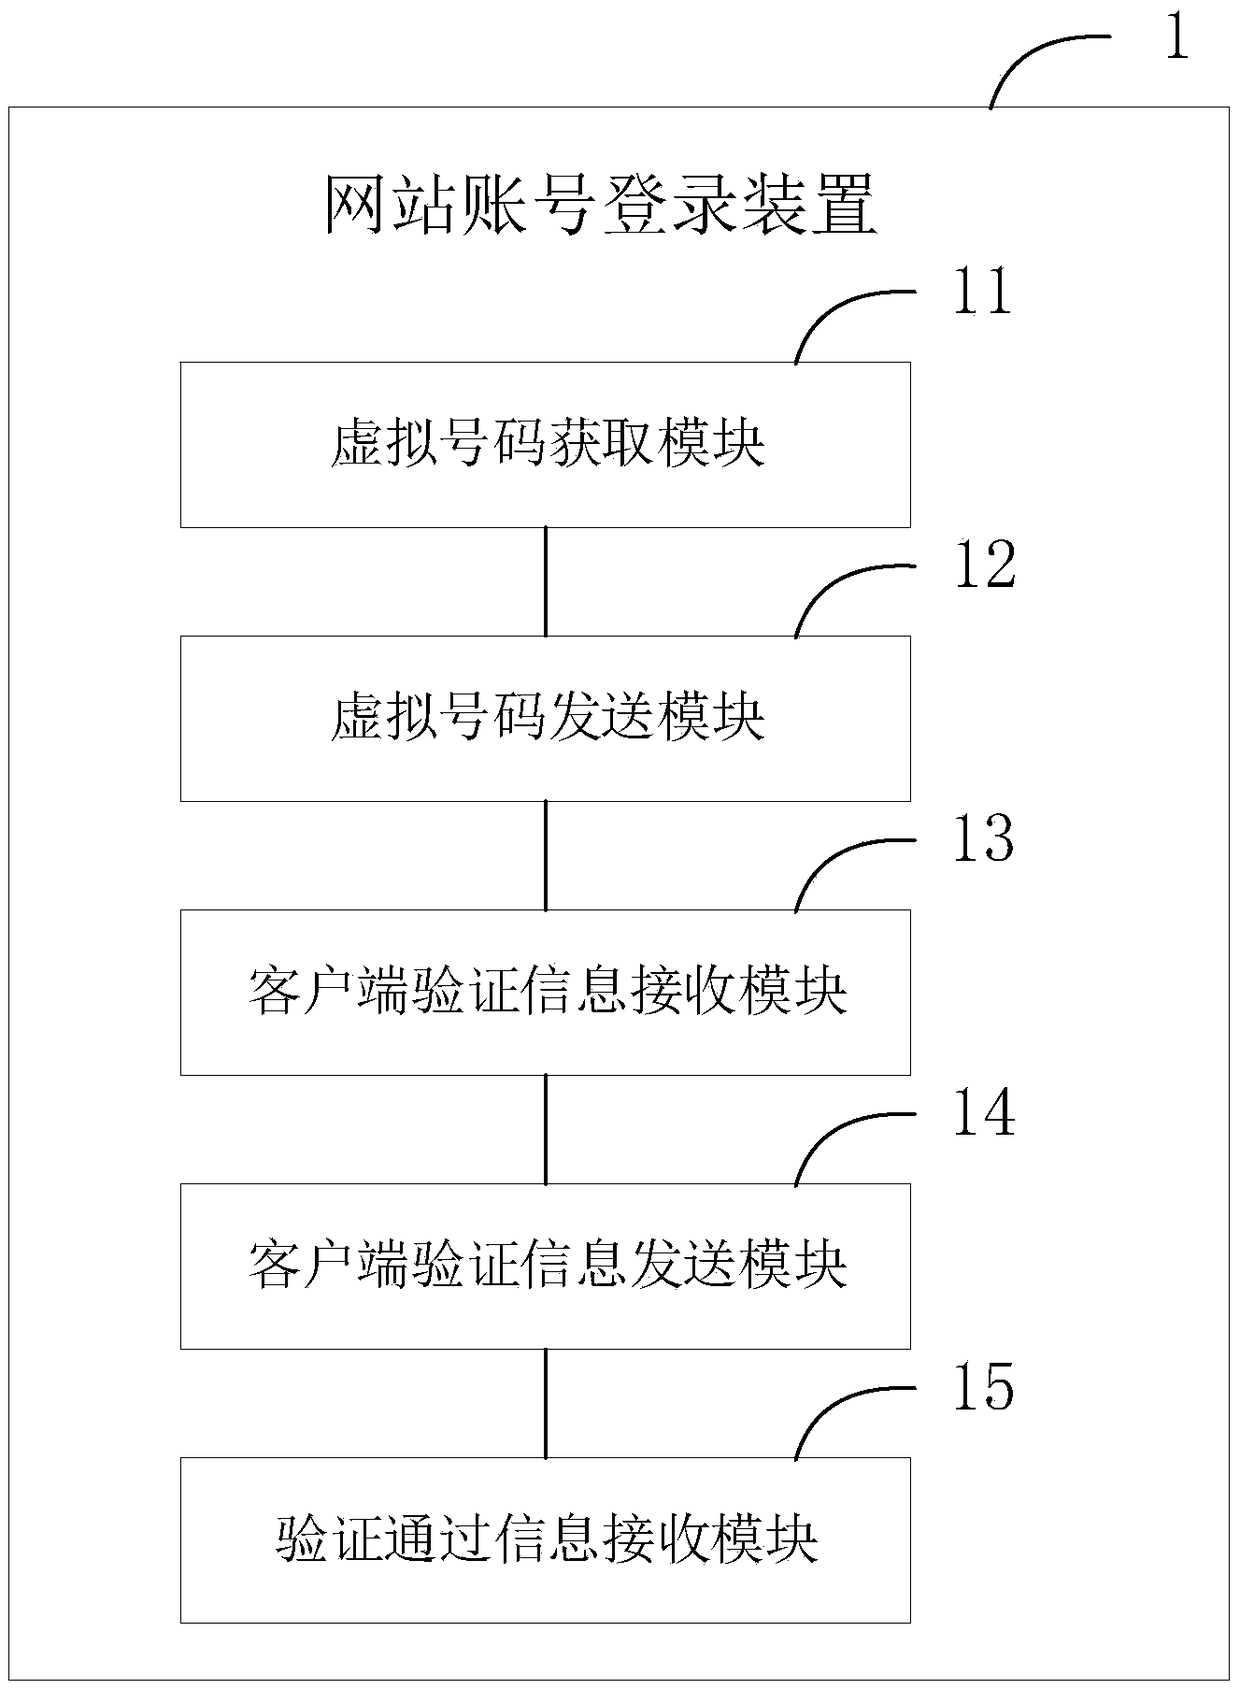 Method and device for website account login, verification and verification information processing and system